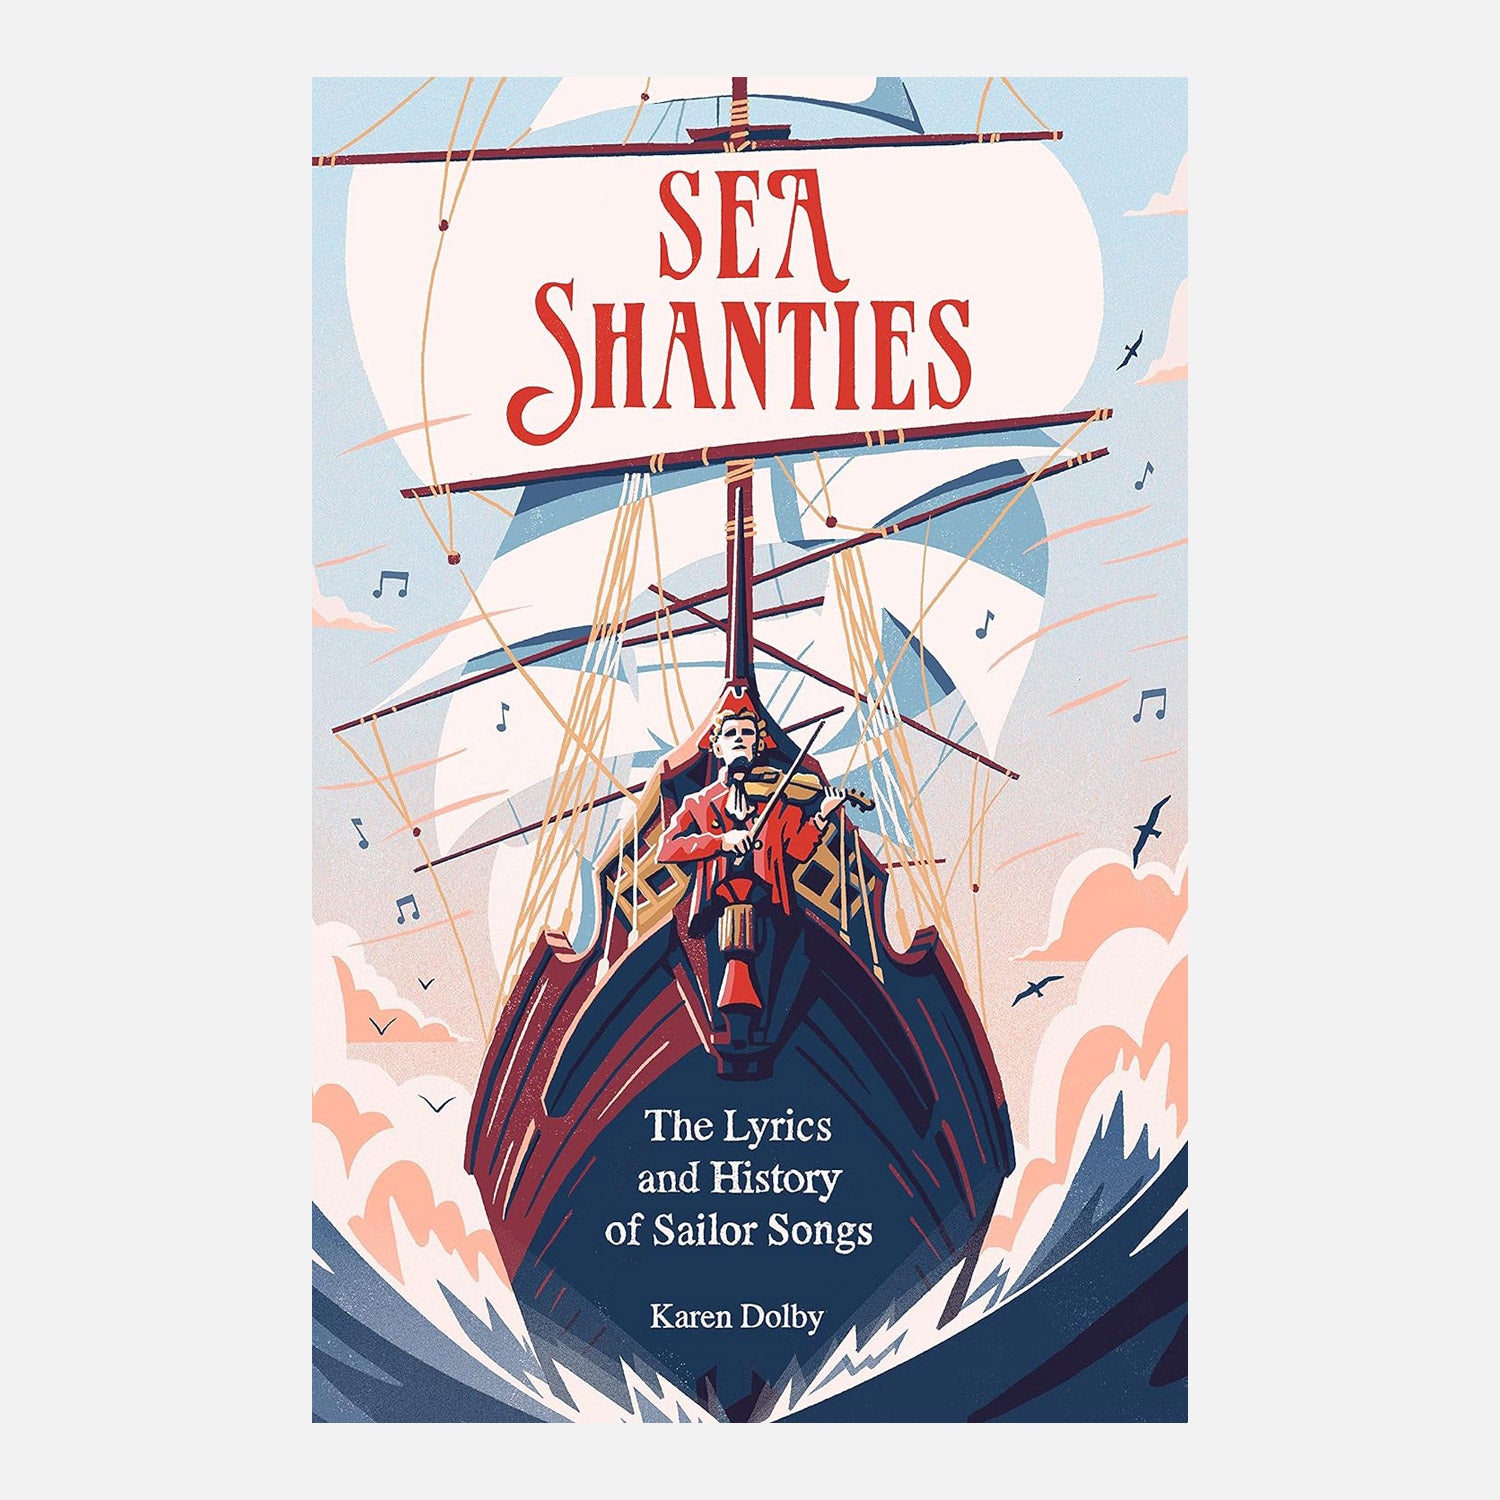 Sea shanties book cover with ship illustration